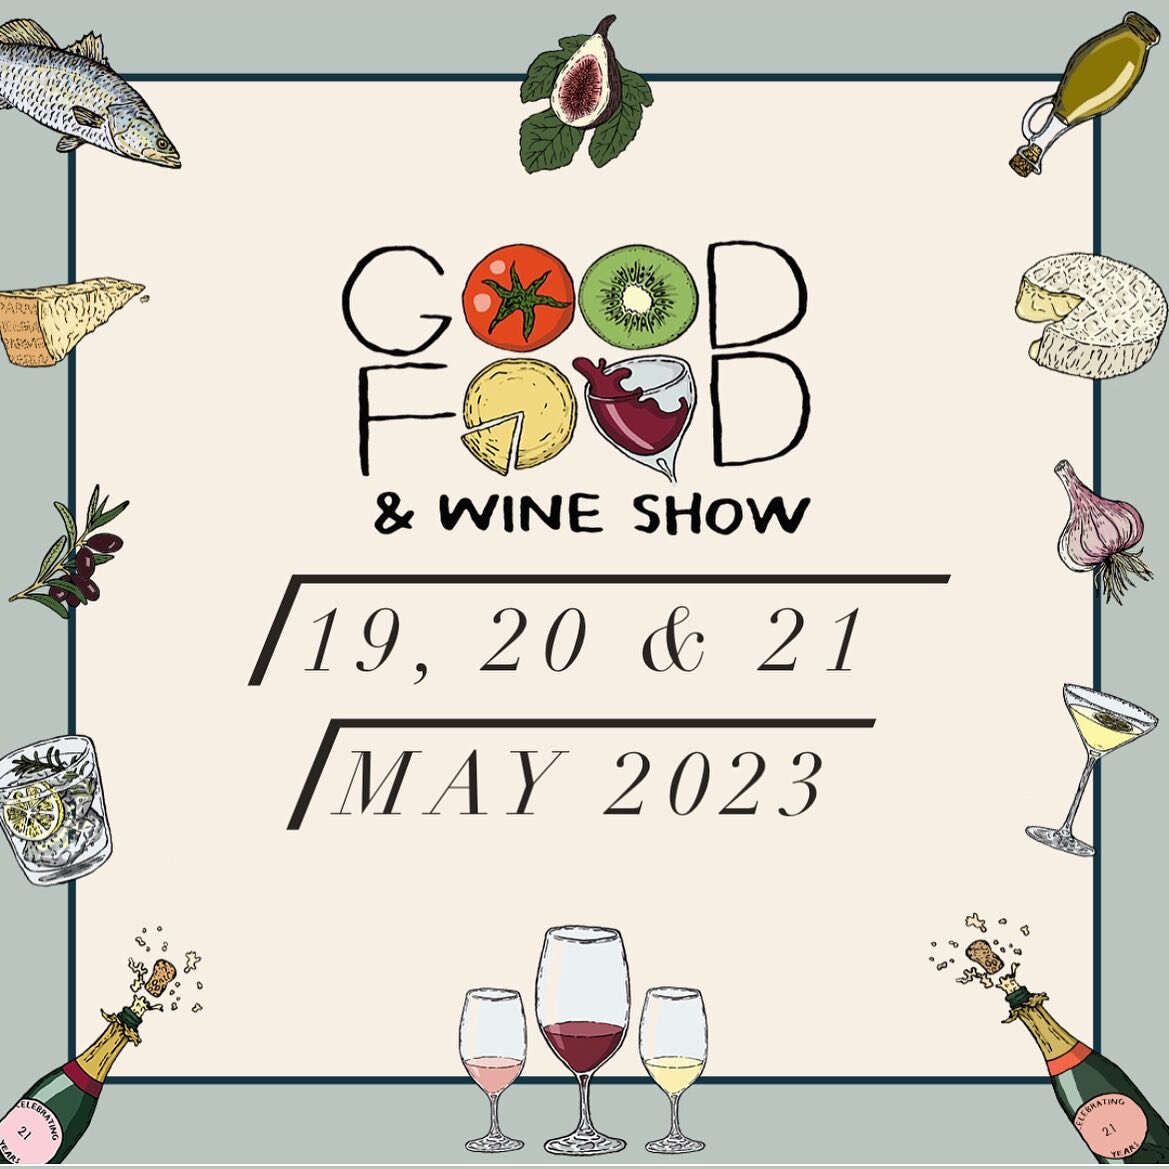 We are so excited to be taking part in this years @goodfoodwine show 19,20 &amp; 21 May

Make sure you come and say hello 👋🏽 

DATES &amp; TIMES

Friday 19 May 2023
10:00AM &ndash; 5:00PM

Saturday 20 May 2023
10:00AM &ndash; 6:00PM

Sunday 21 May 